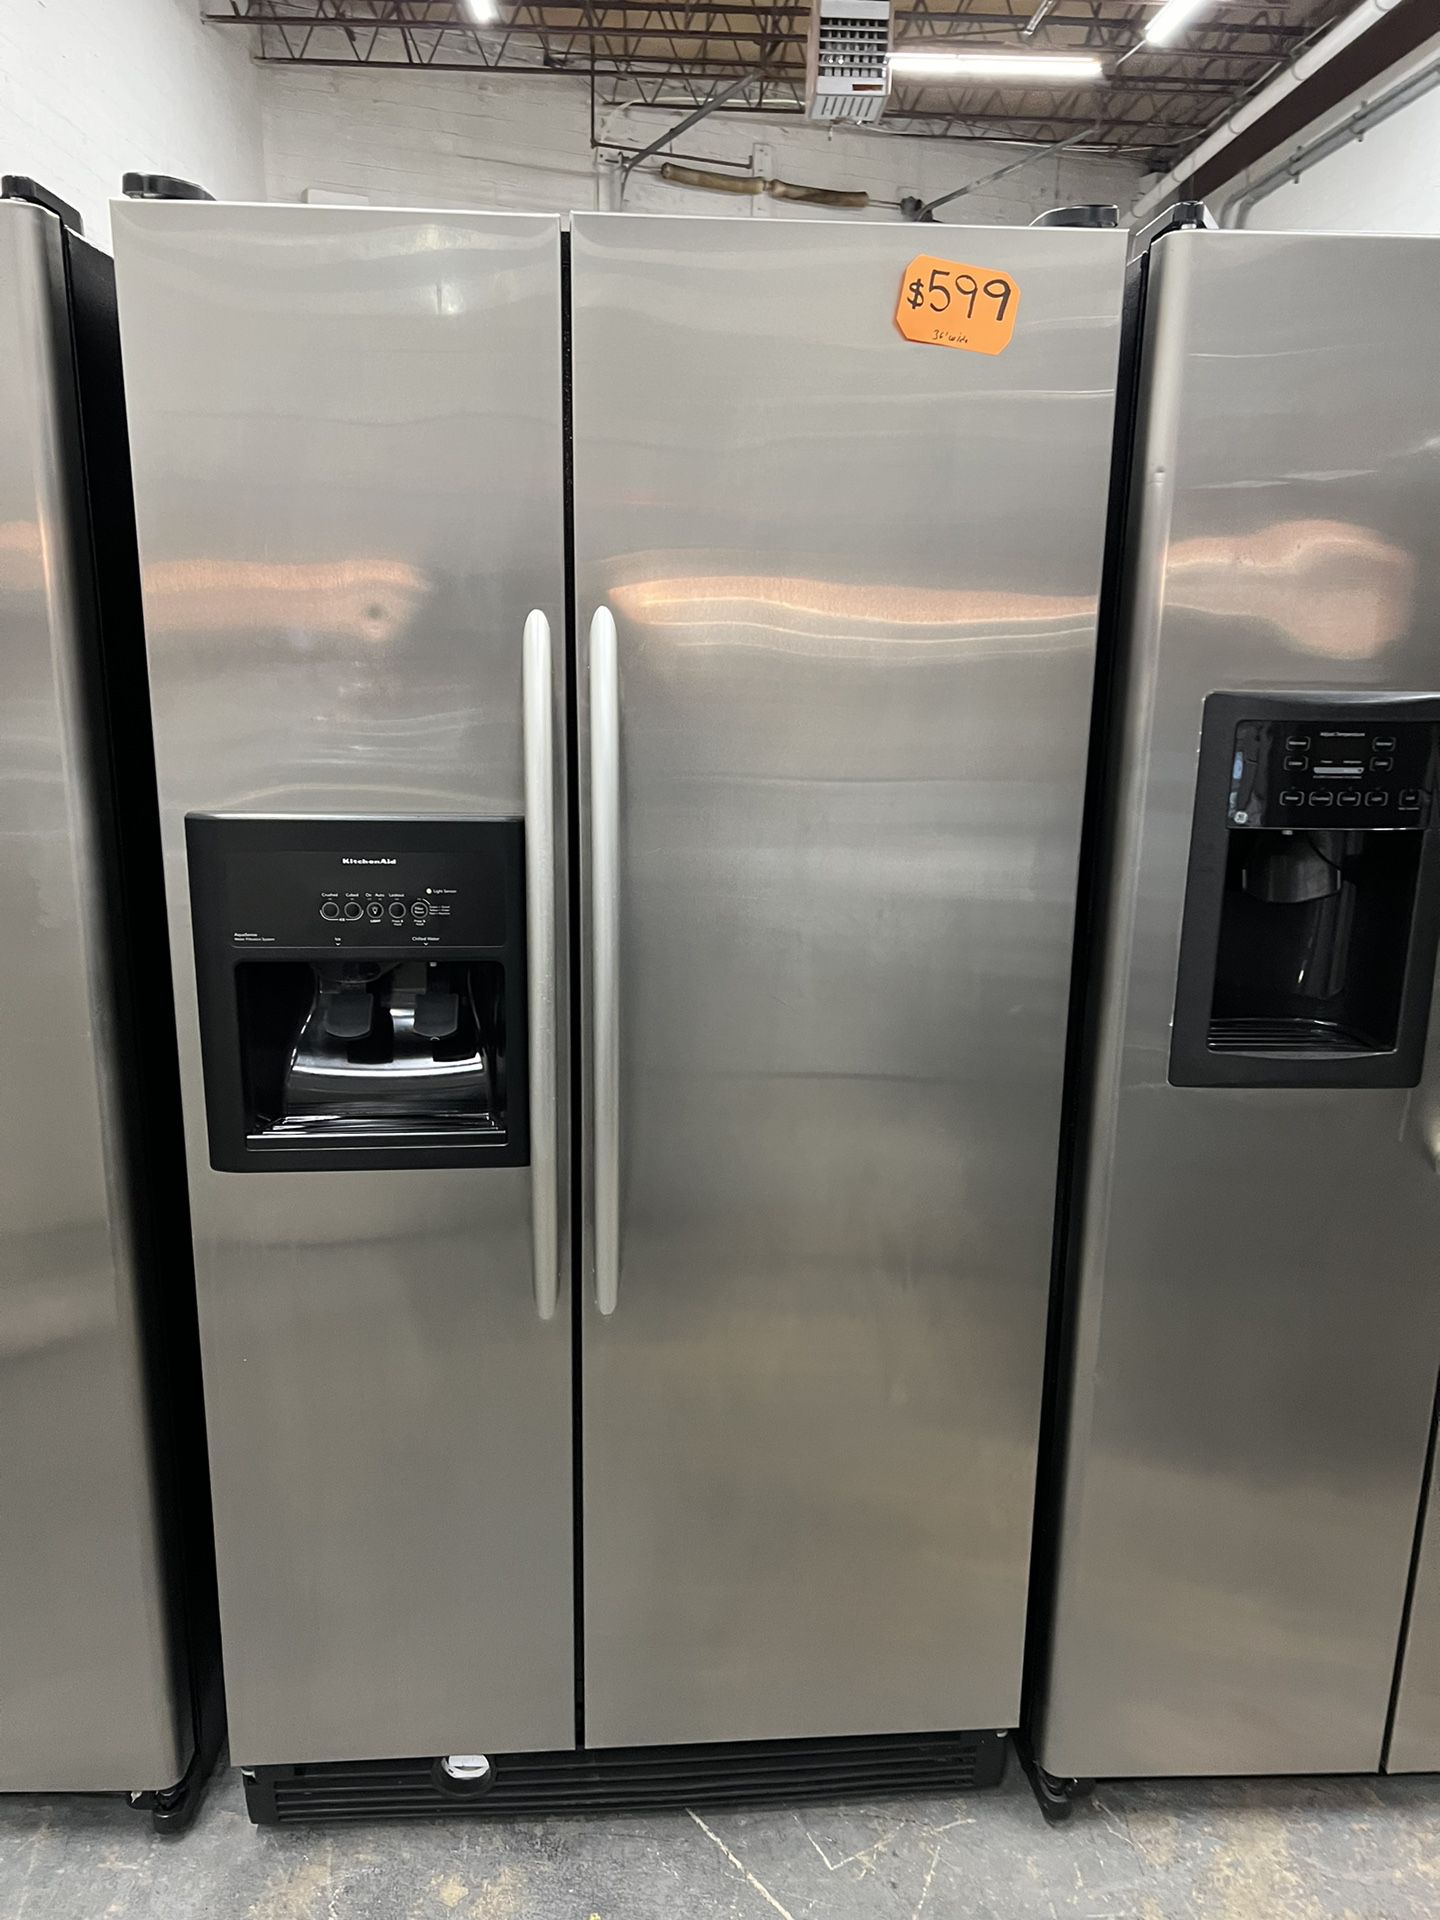 Kitchen Aid 36” Wide Side By Side Stainless Steel Refrigerator In Excellent Condition 